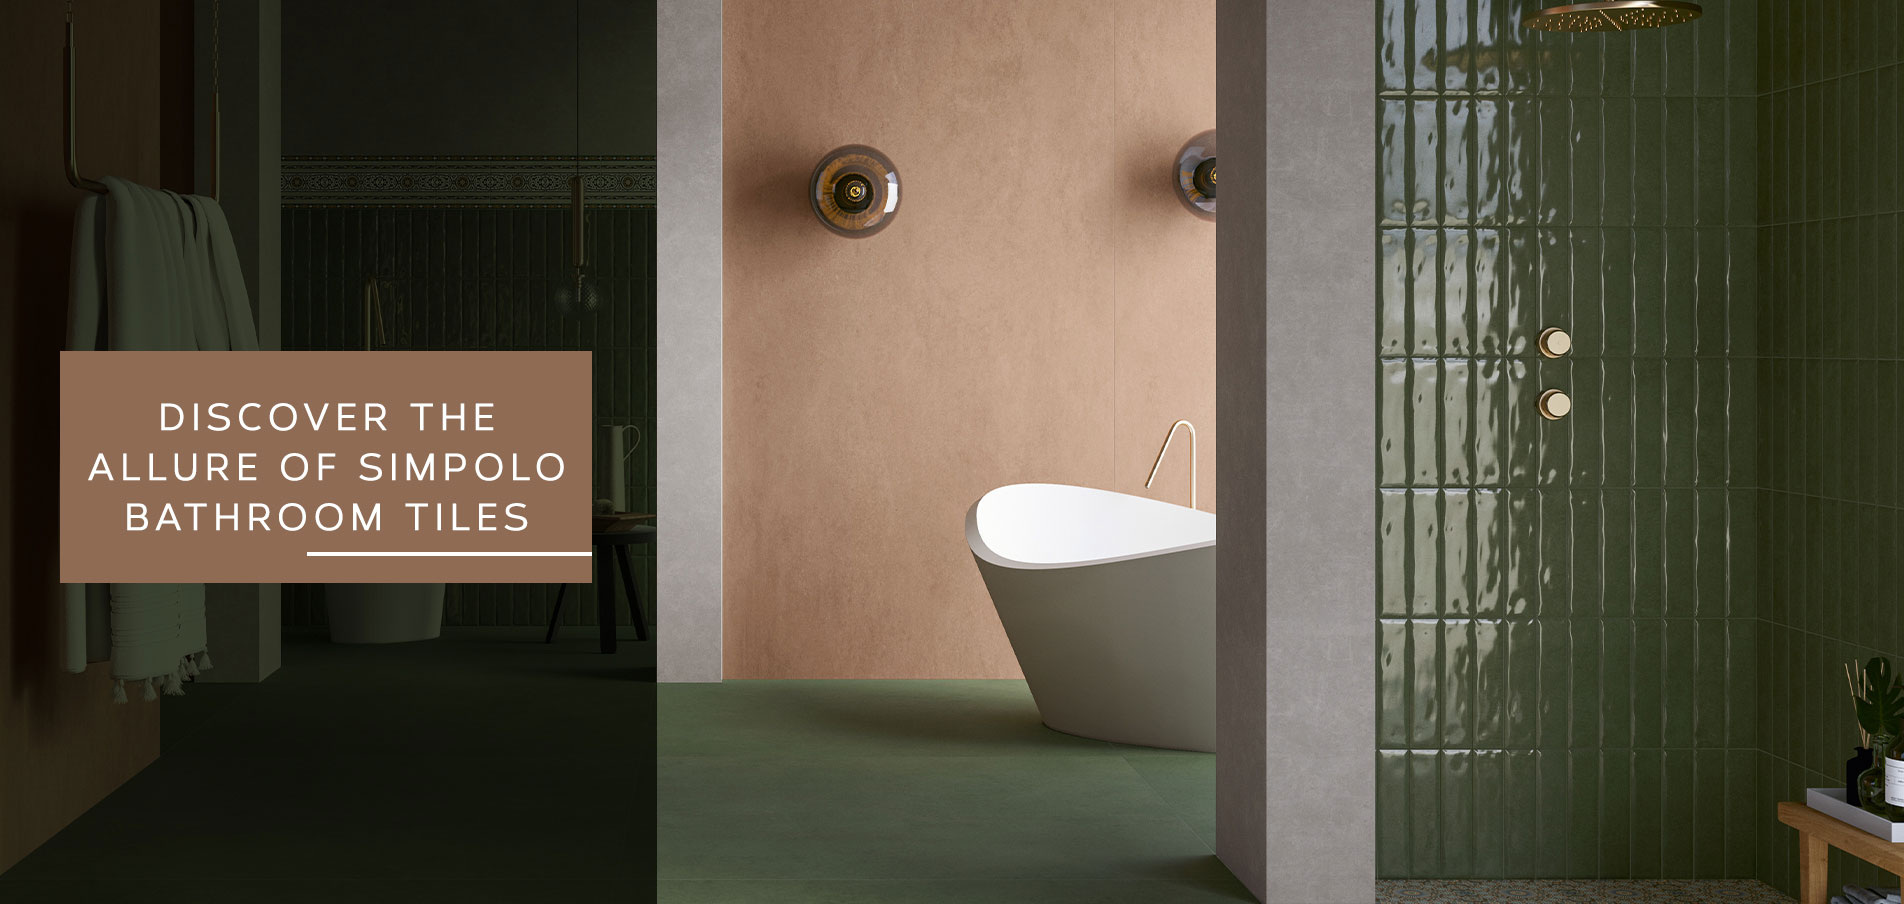 Experience the Allure of Simpolo Bathroom Tiles